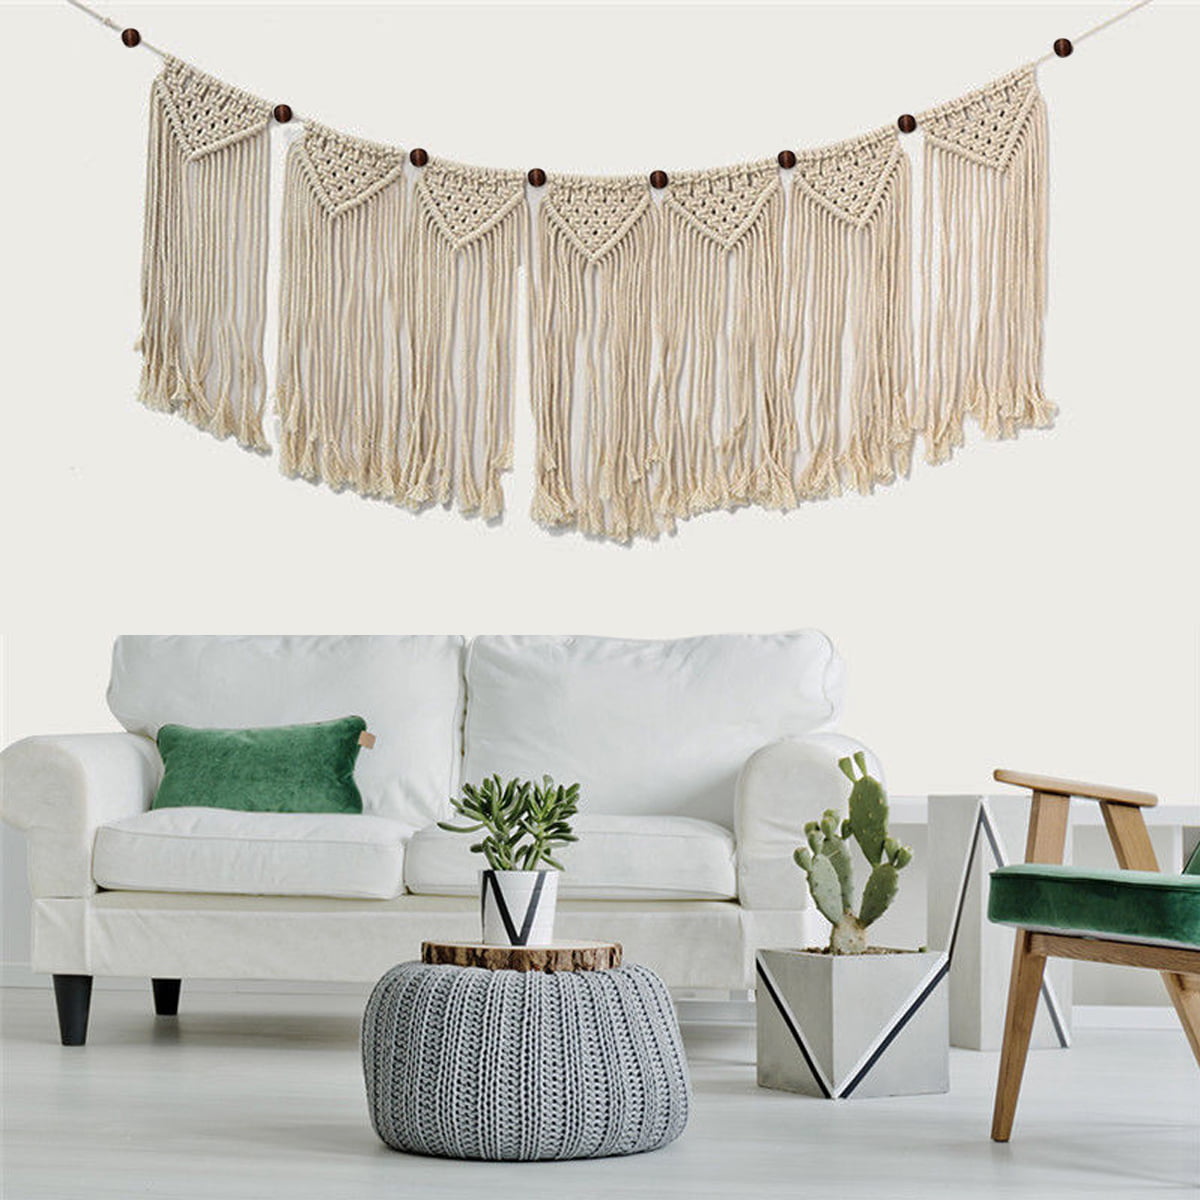 Dremisland Macrame Wall Hanging Leaf Feather Handmade Woven Tapestry Boho Tassels Wall Pediments Ornaments for Home Decor Apartment Living Room Bedroom Decor